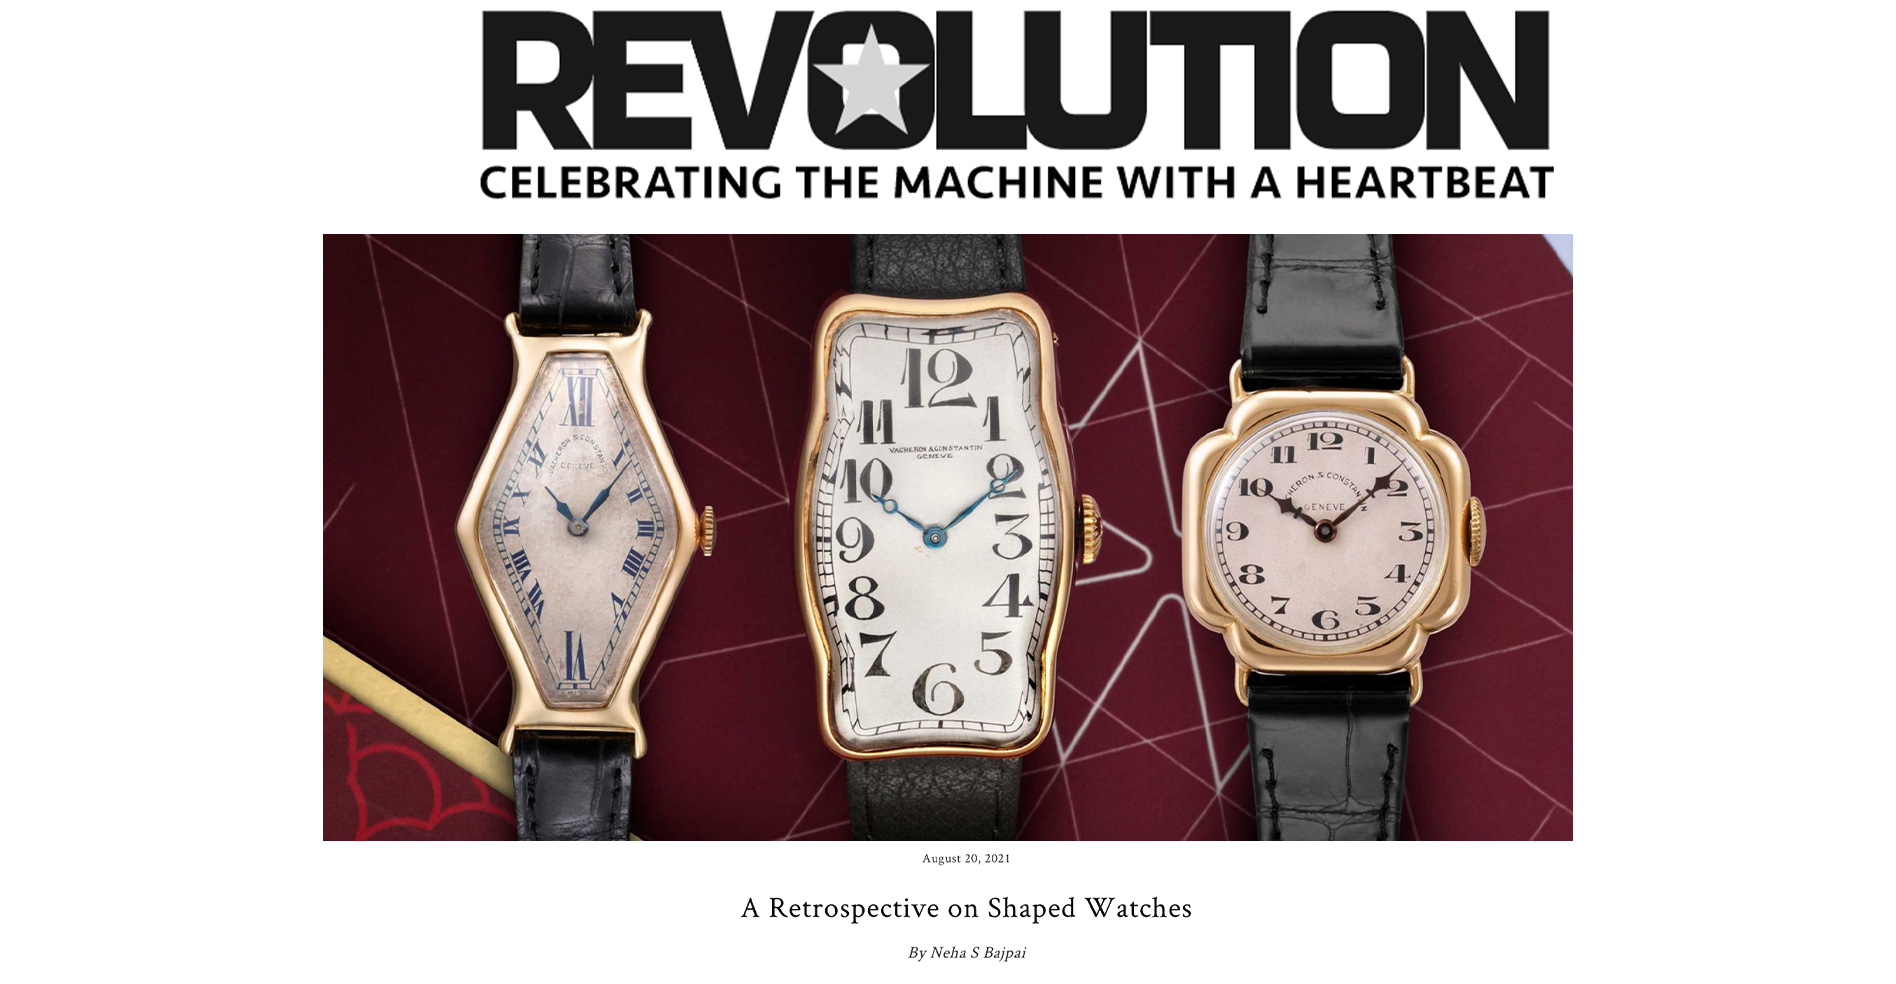 Revolution - Celebrating the Machine with a Heartbeat